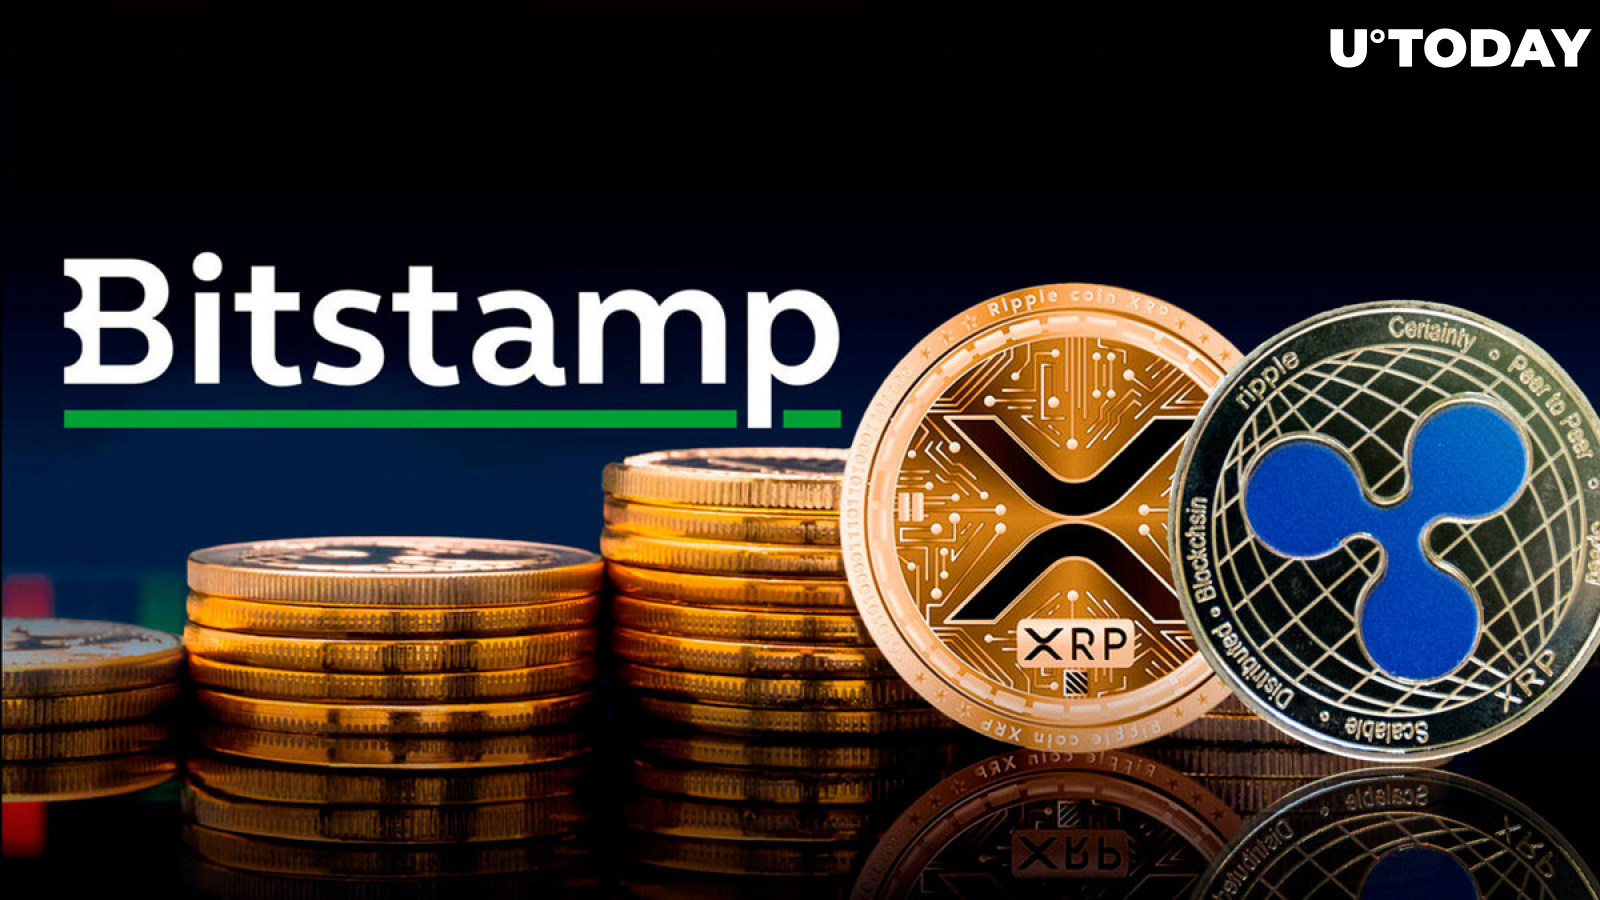 Ripple Moves Millions of XRP to Bitstamp, With Price Jumping 7% This Week